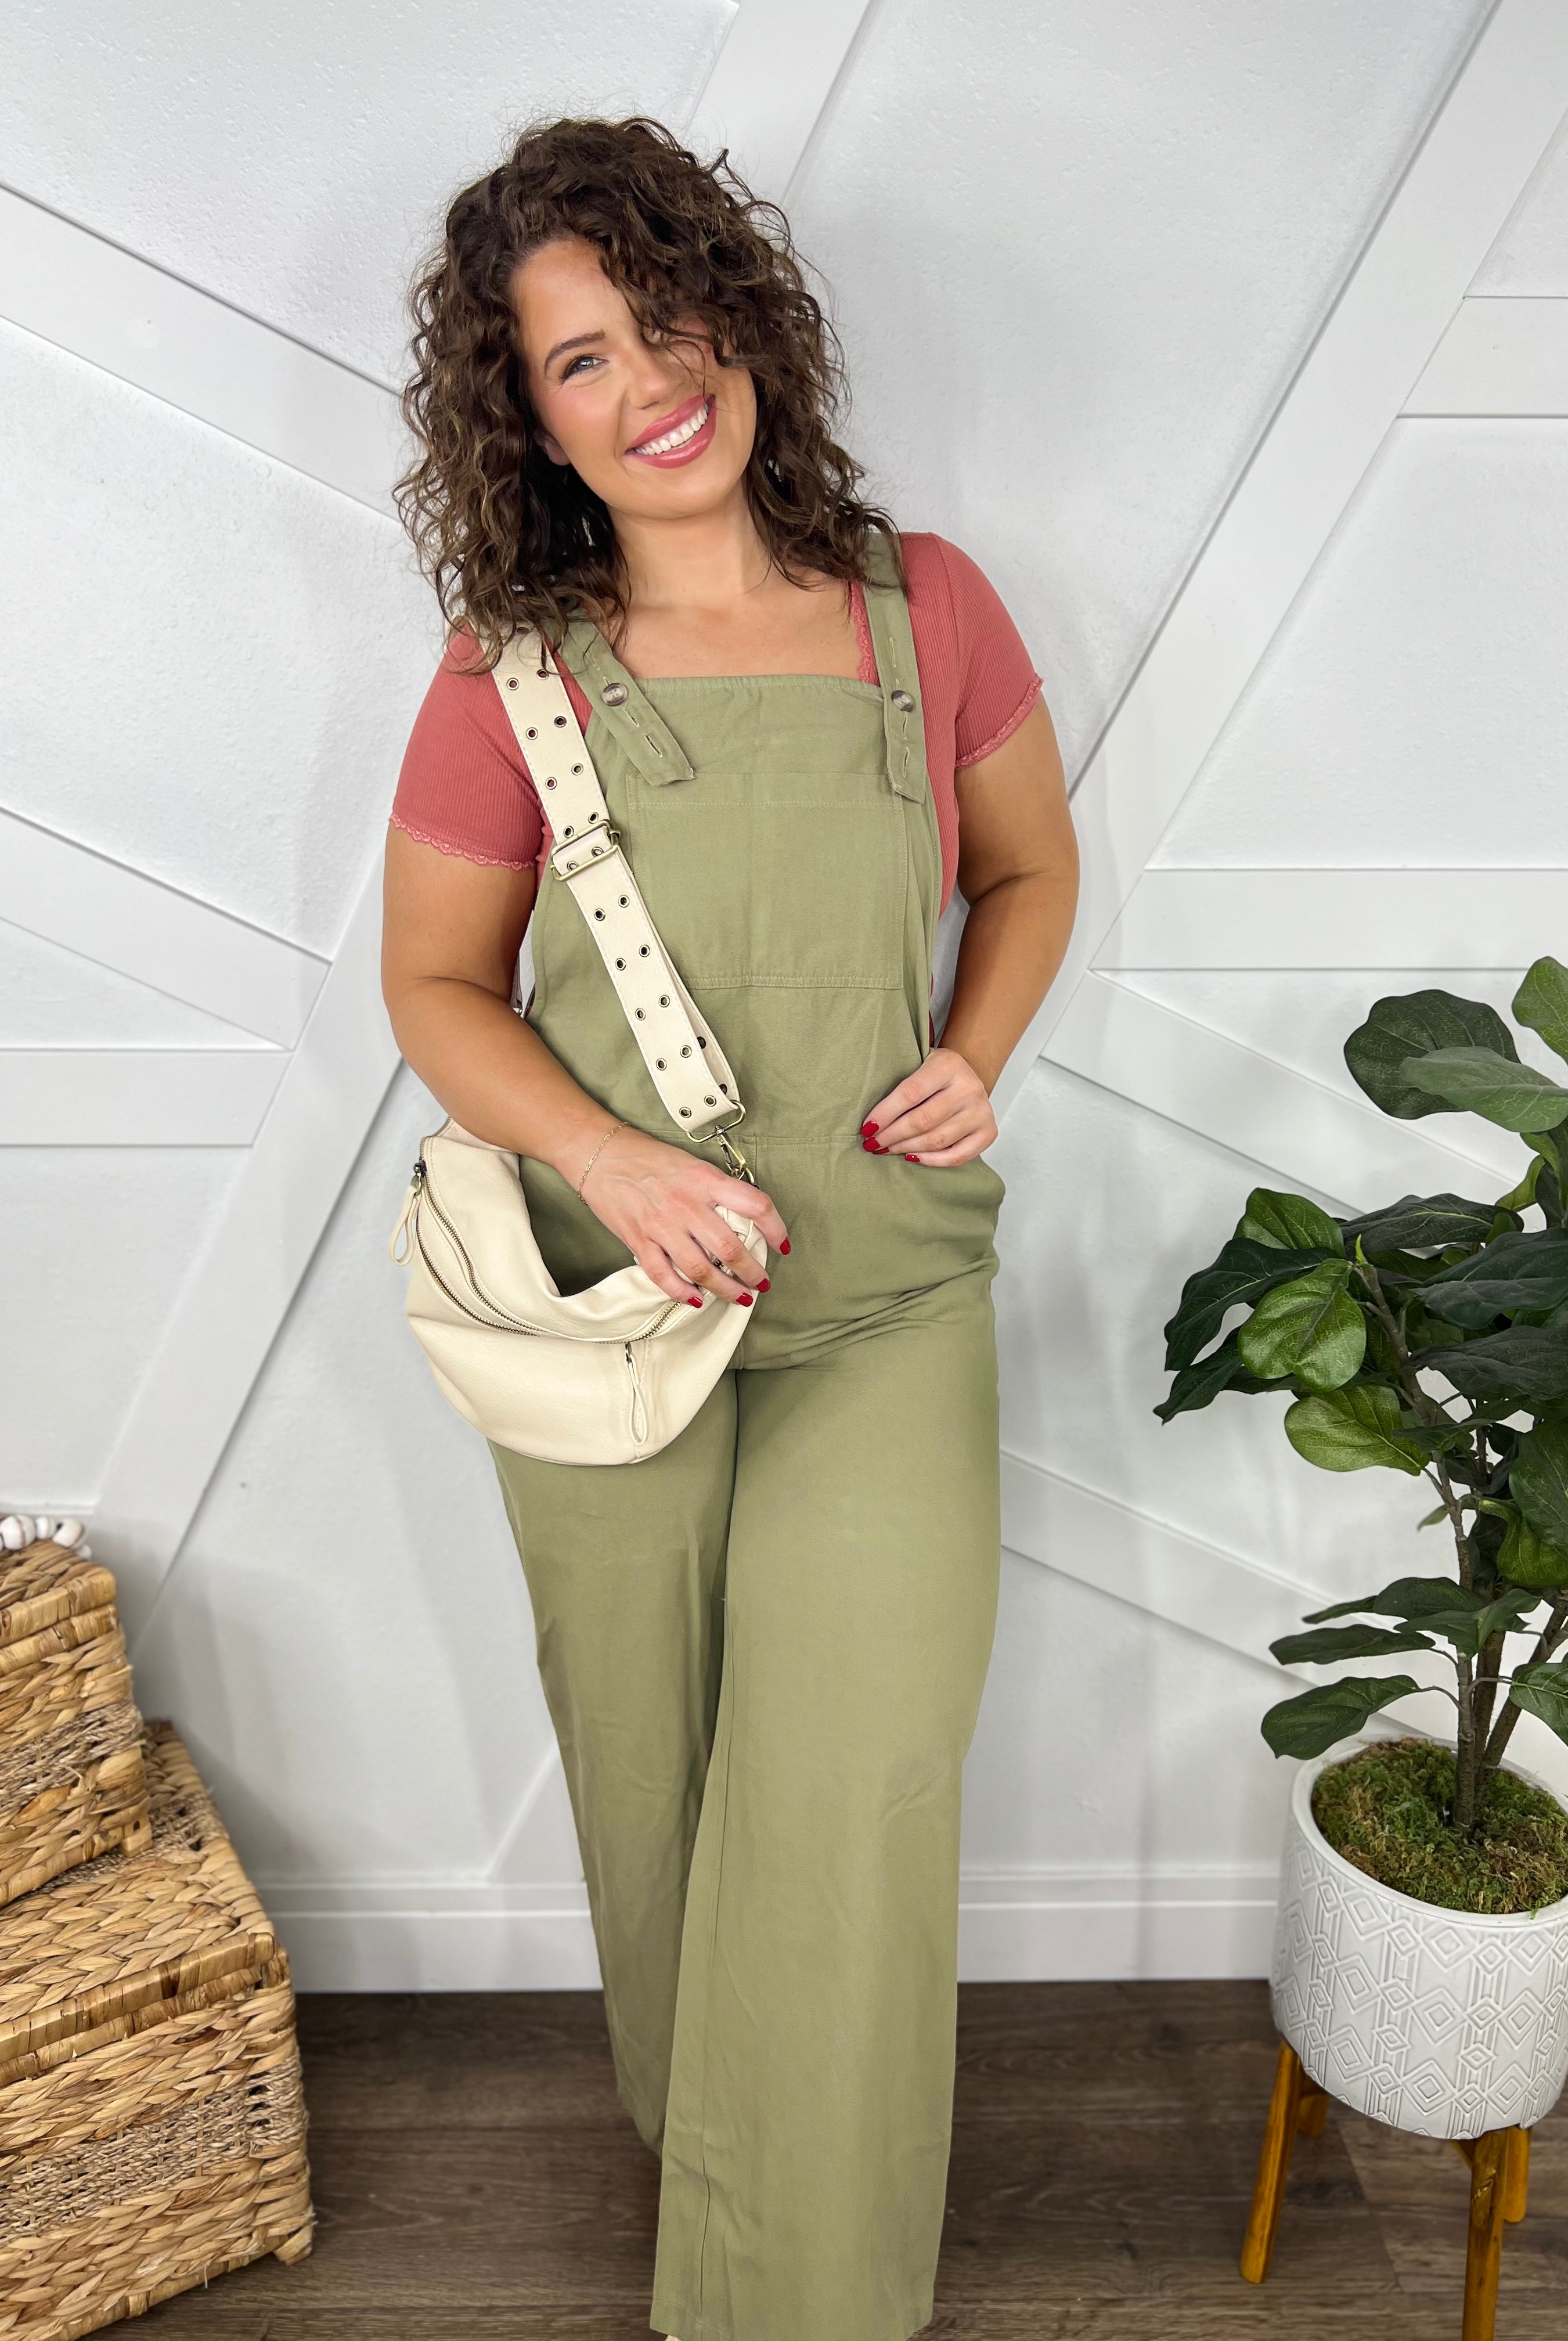 Heirloom Overalls-230 Dresses/Jumpsuits/Rompers-White Birch-Heathered Boho Boutique, Women's Fashion and Accessories in Palmetto, FL